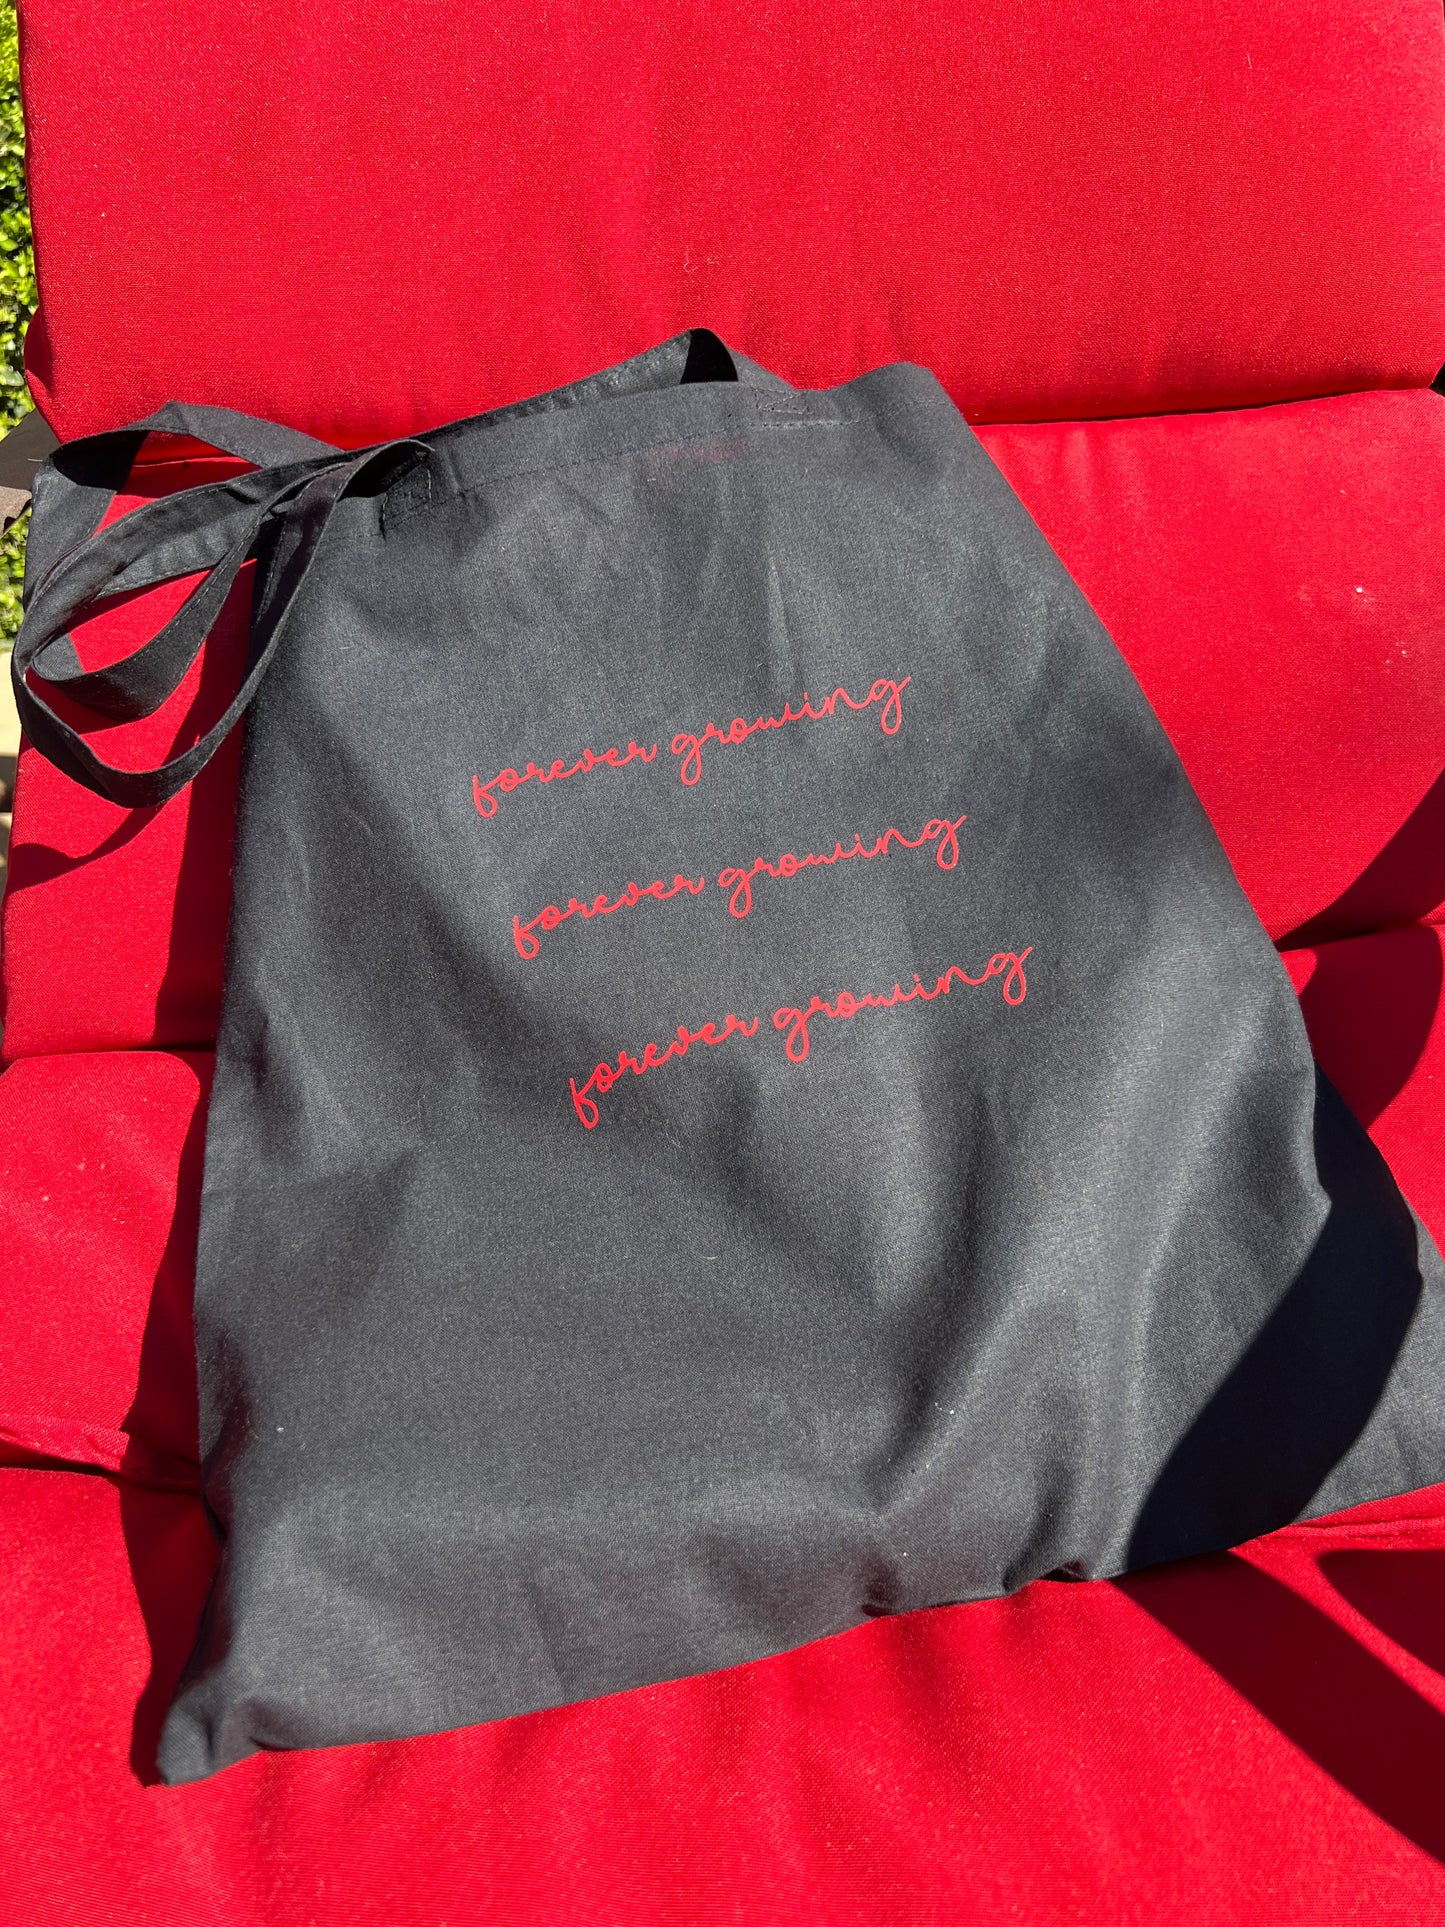 black tote bag red text on red pool chair